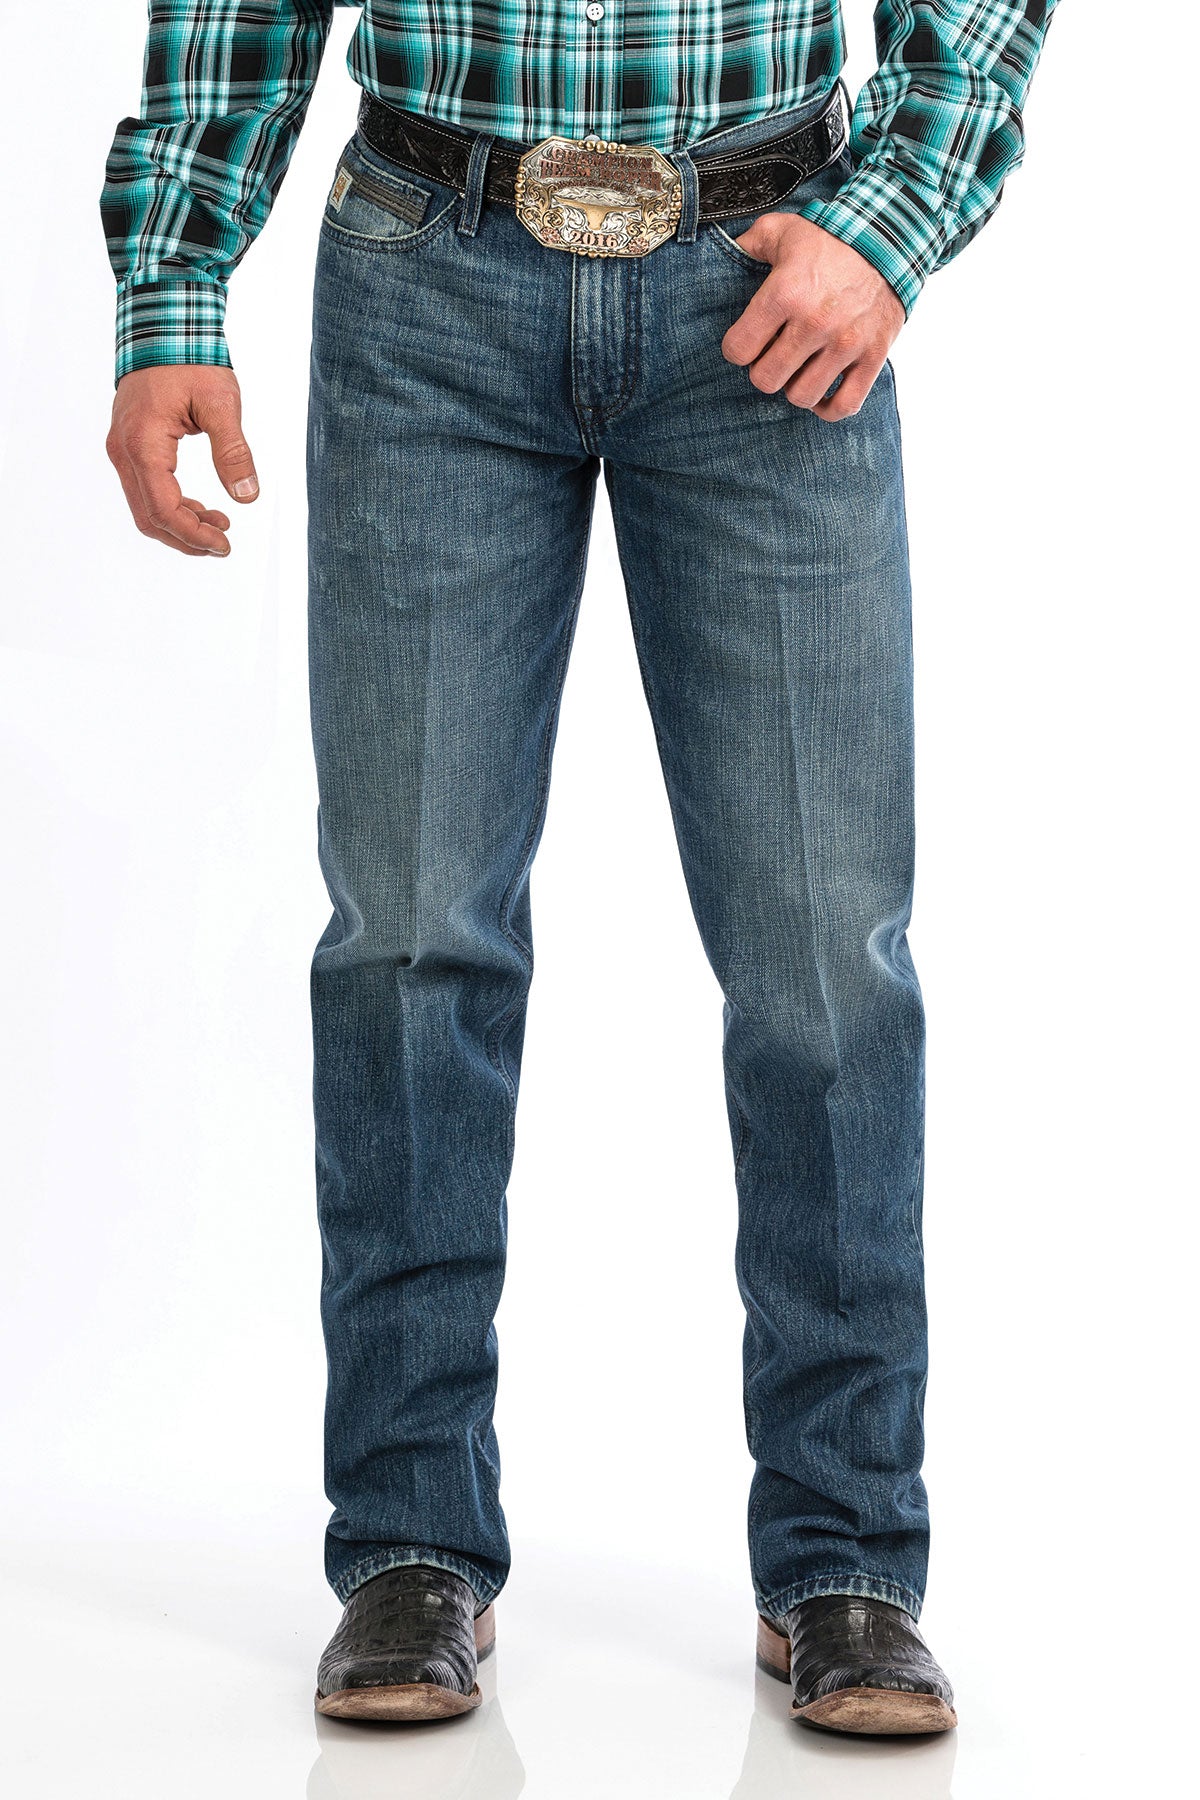 Cinch GRANT  jeans  *CLOSEOUT*